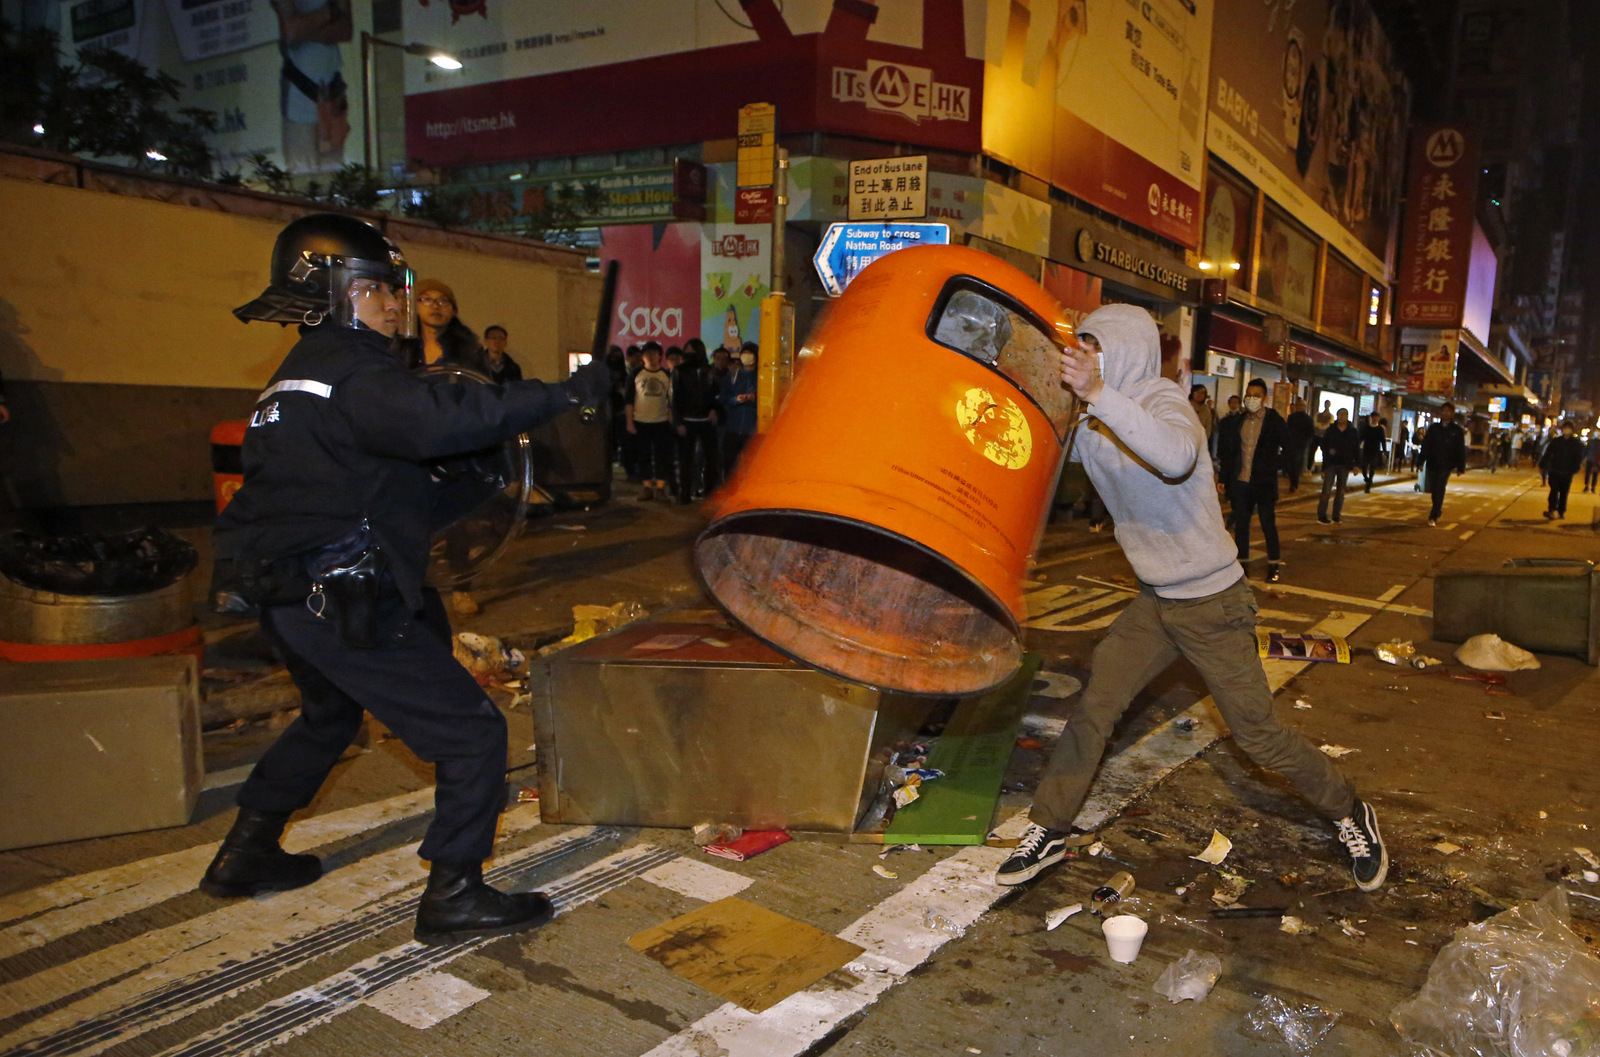 A rioter tries to throw a litter bin at police on a street in Mong Kok district of Hong Kong, Tuesday, Feb. 9, 2016. Hong Kong's Lunar New Year celebration descended into chaotic scenes as protesters and police, who fired warning shots into the air, clashed over a street market selling fish balls and other local holiday delicacies, leaving dozens injured and arrested. (AP Photo/Kin Cheung)